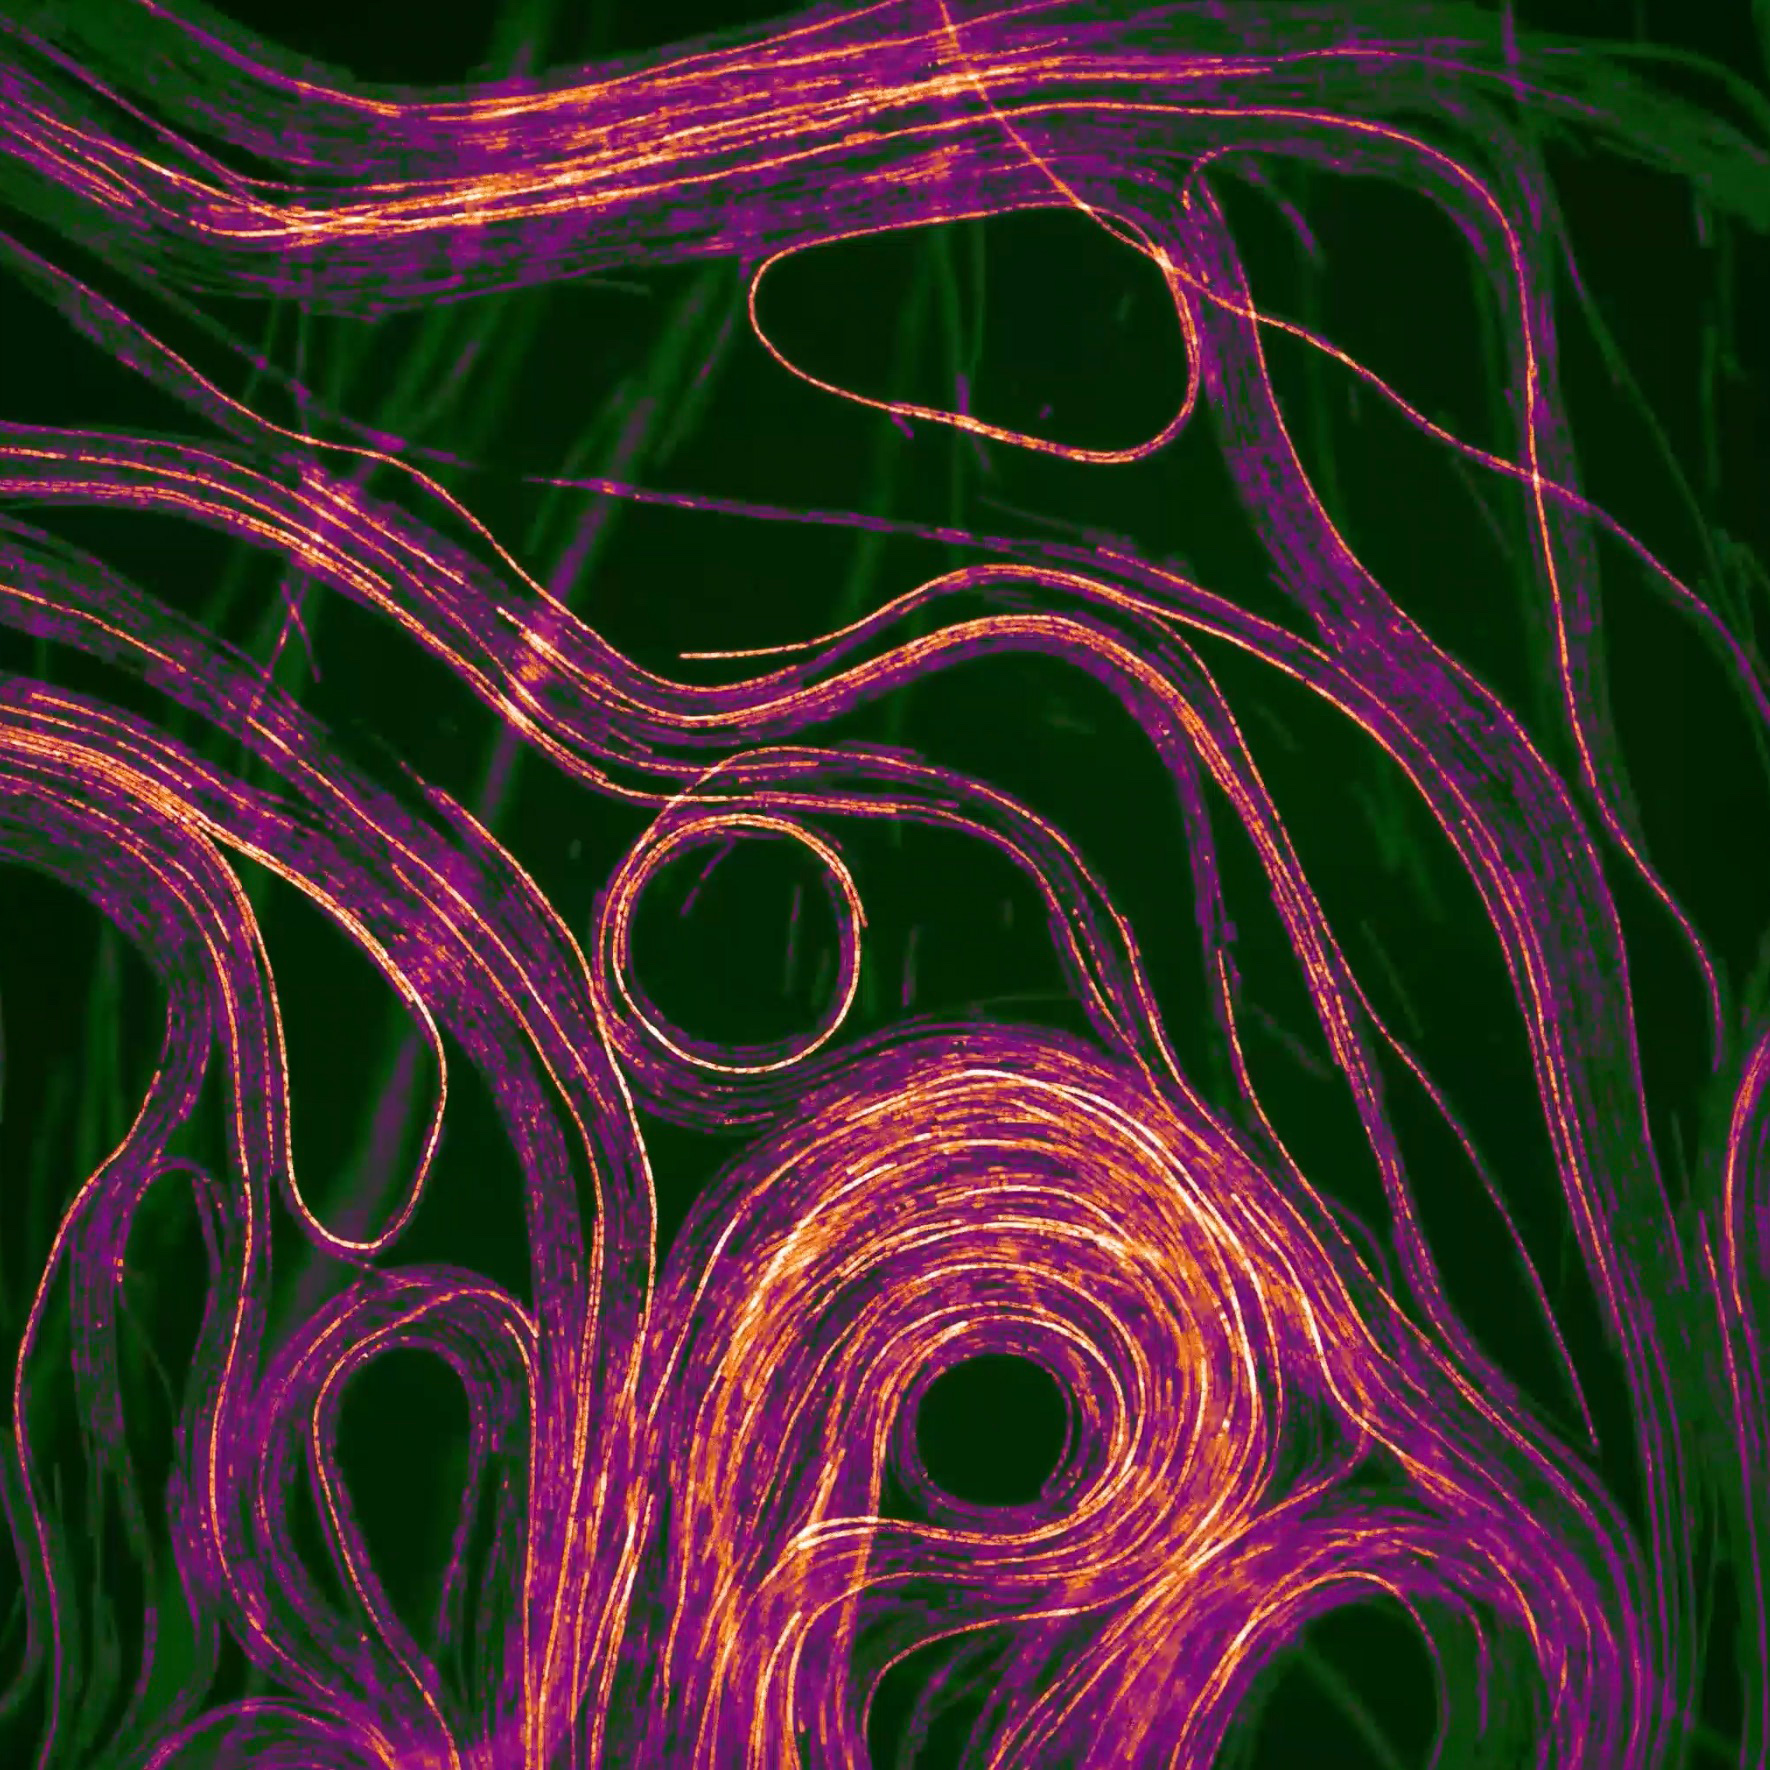 This square image is a still from a film of cyanobacteria. The picture appears abstract, and features orange and purple threads looping throughout the composition against a black background.